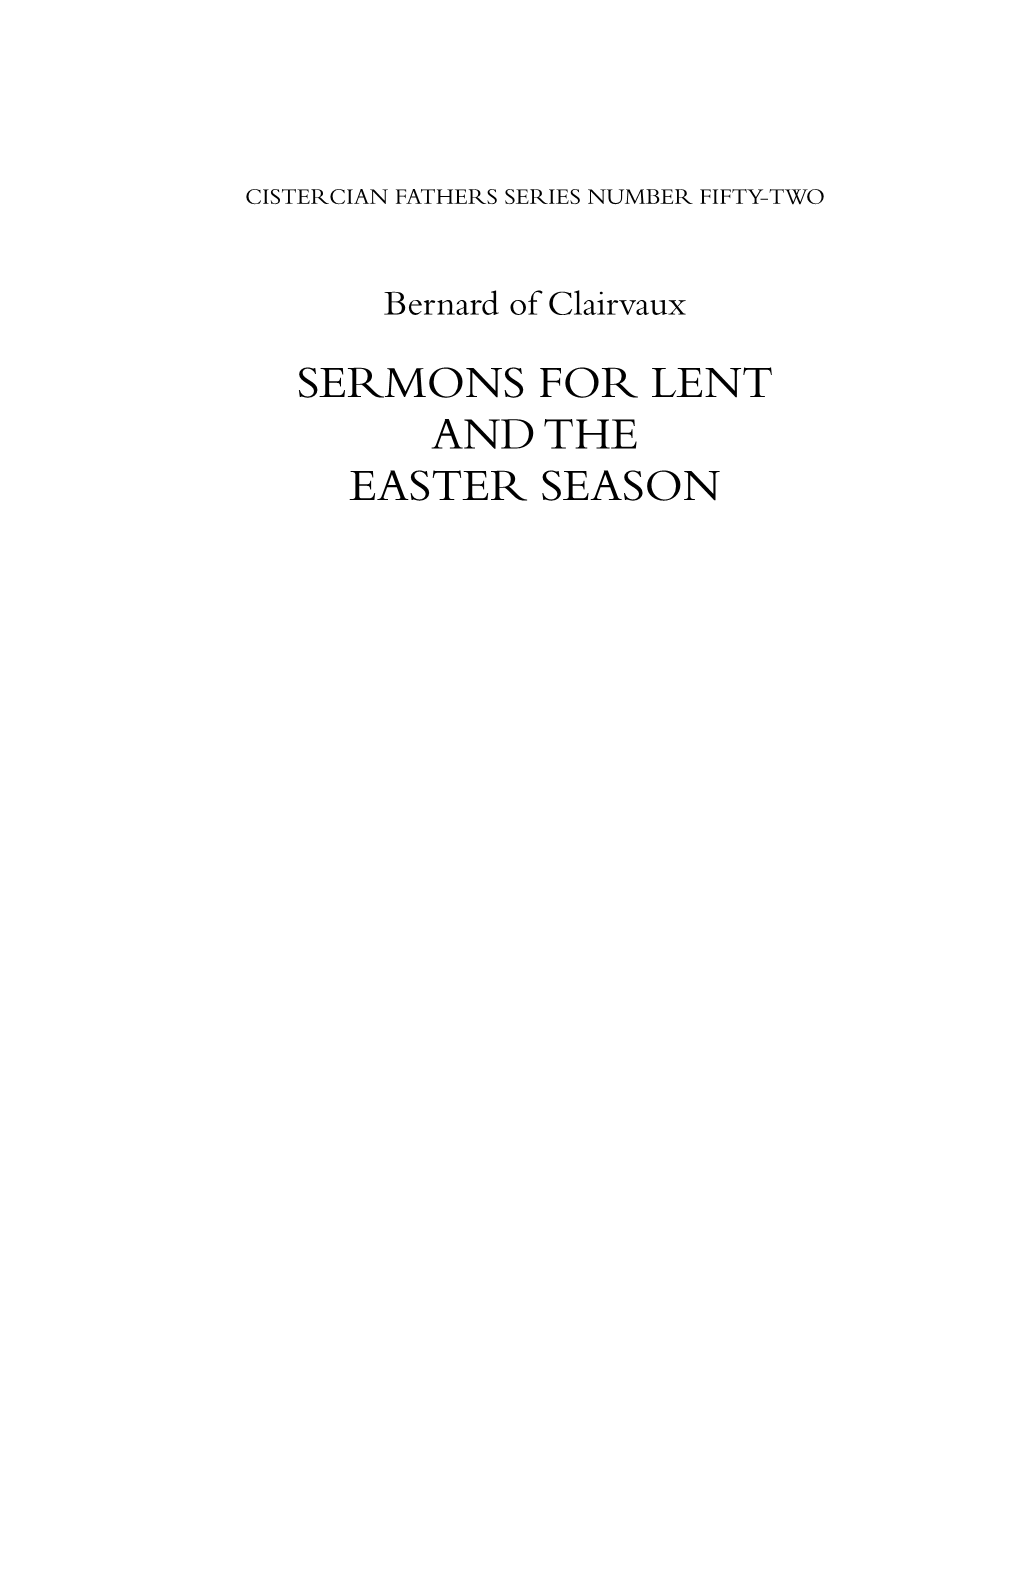 Sermons for Lent and the Easter Season